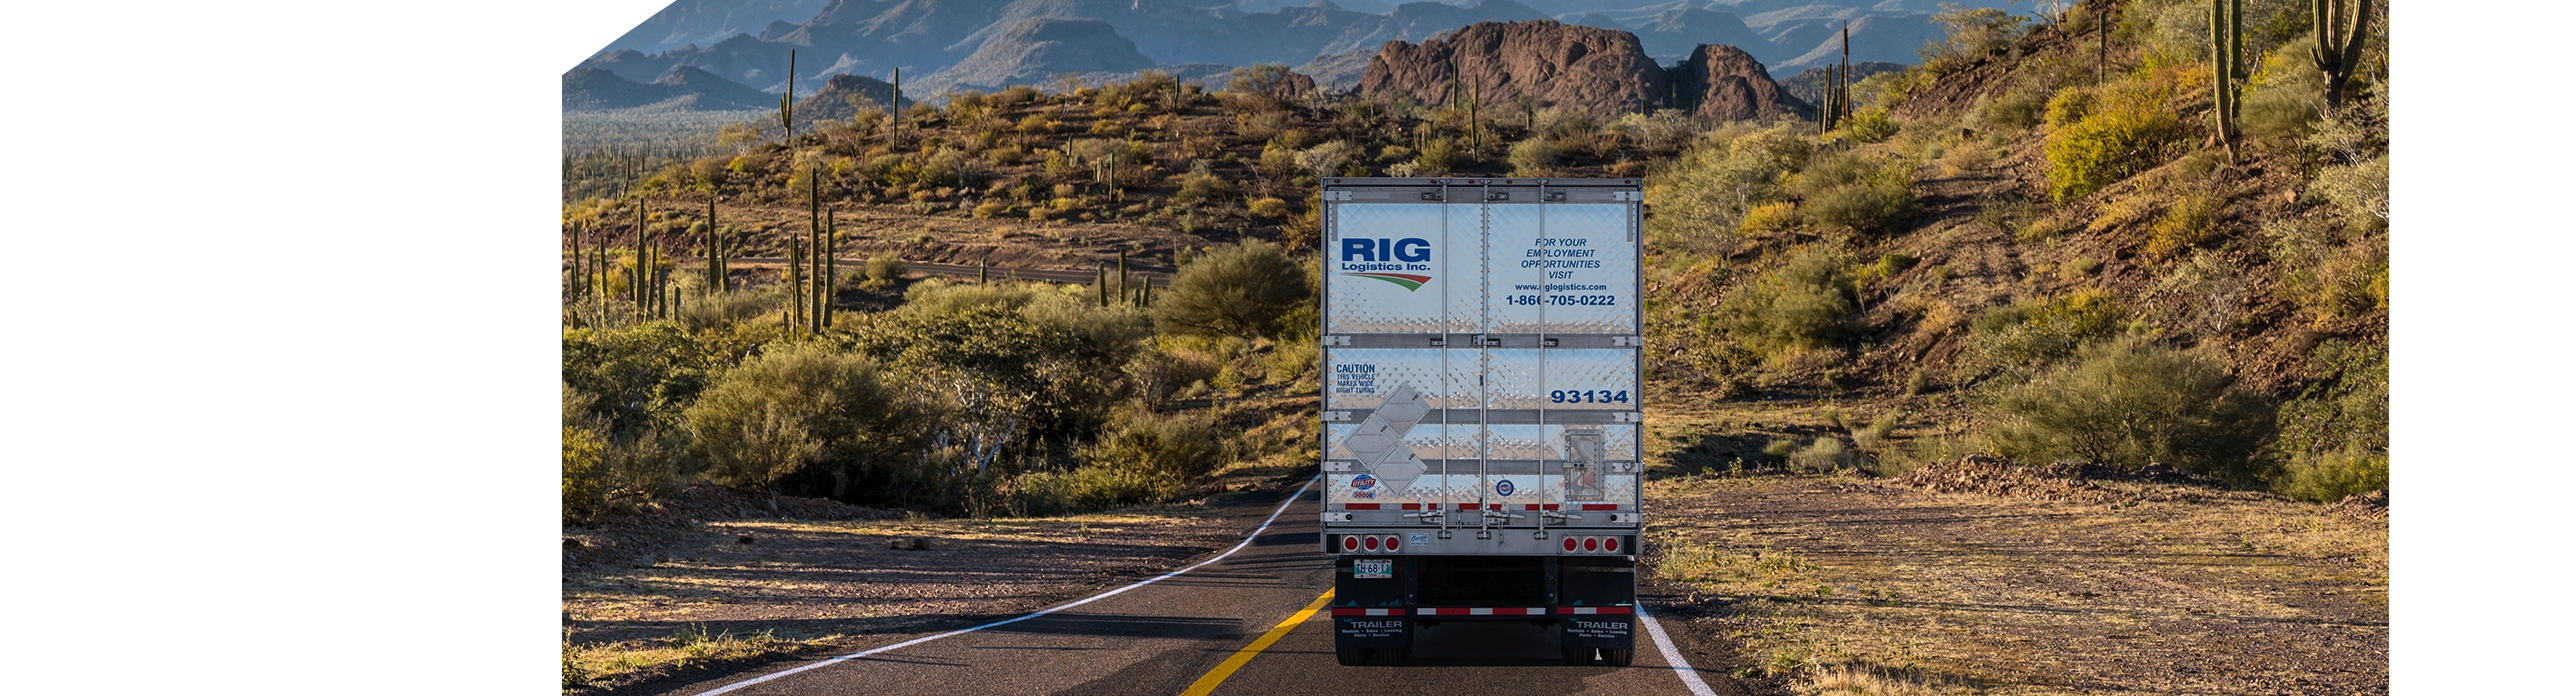 Back of RIG Logistics temperature controlled truck and trailer driving through Mexico landscape